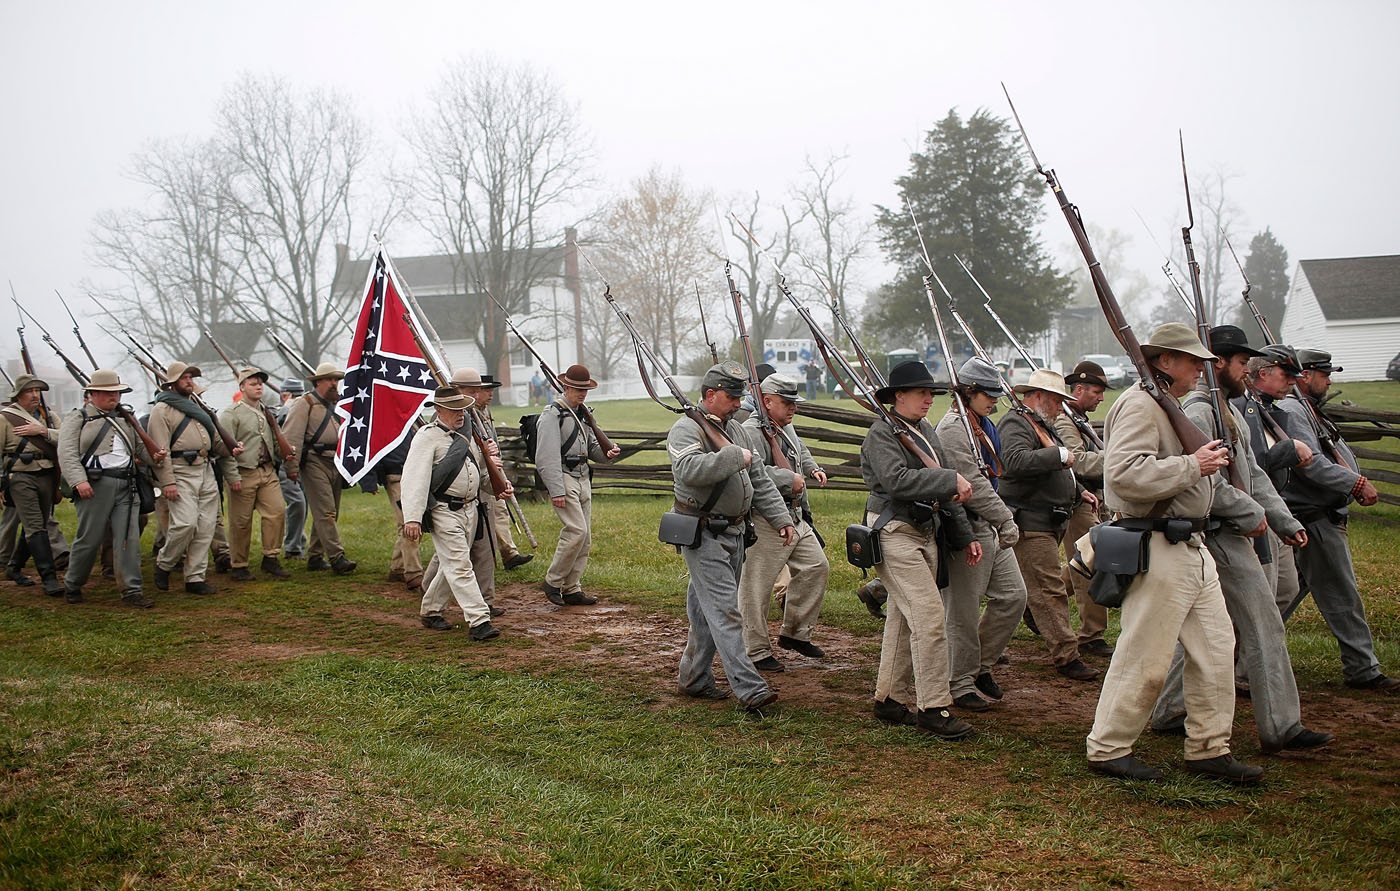 The Surrender Of The Confederate Army Brought